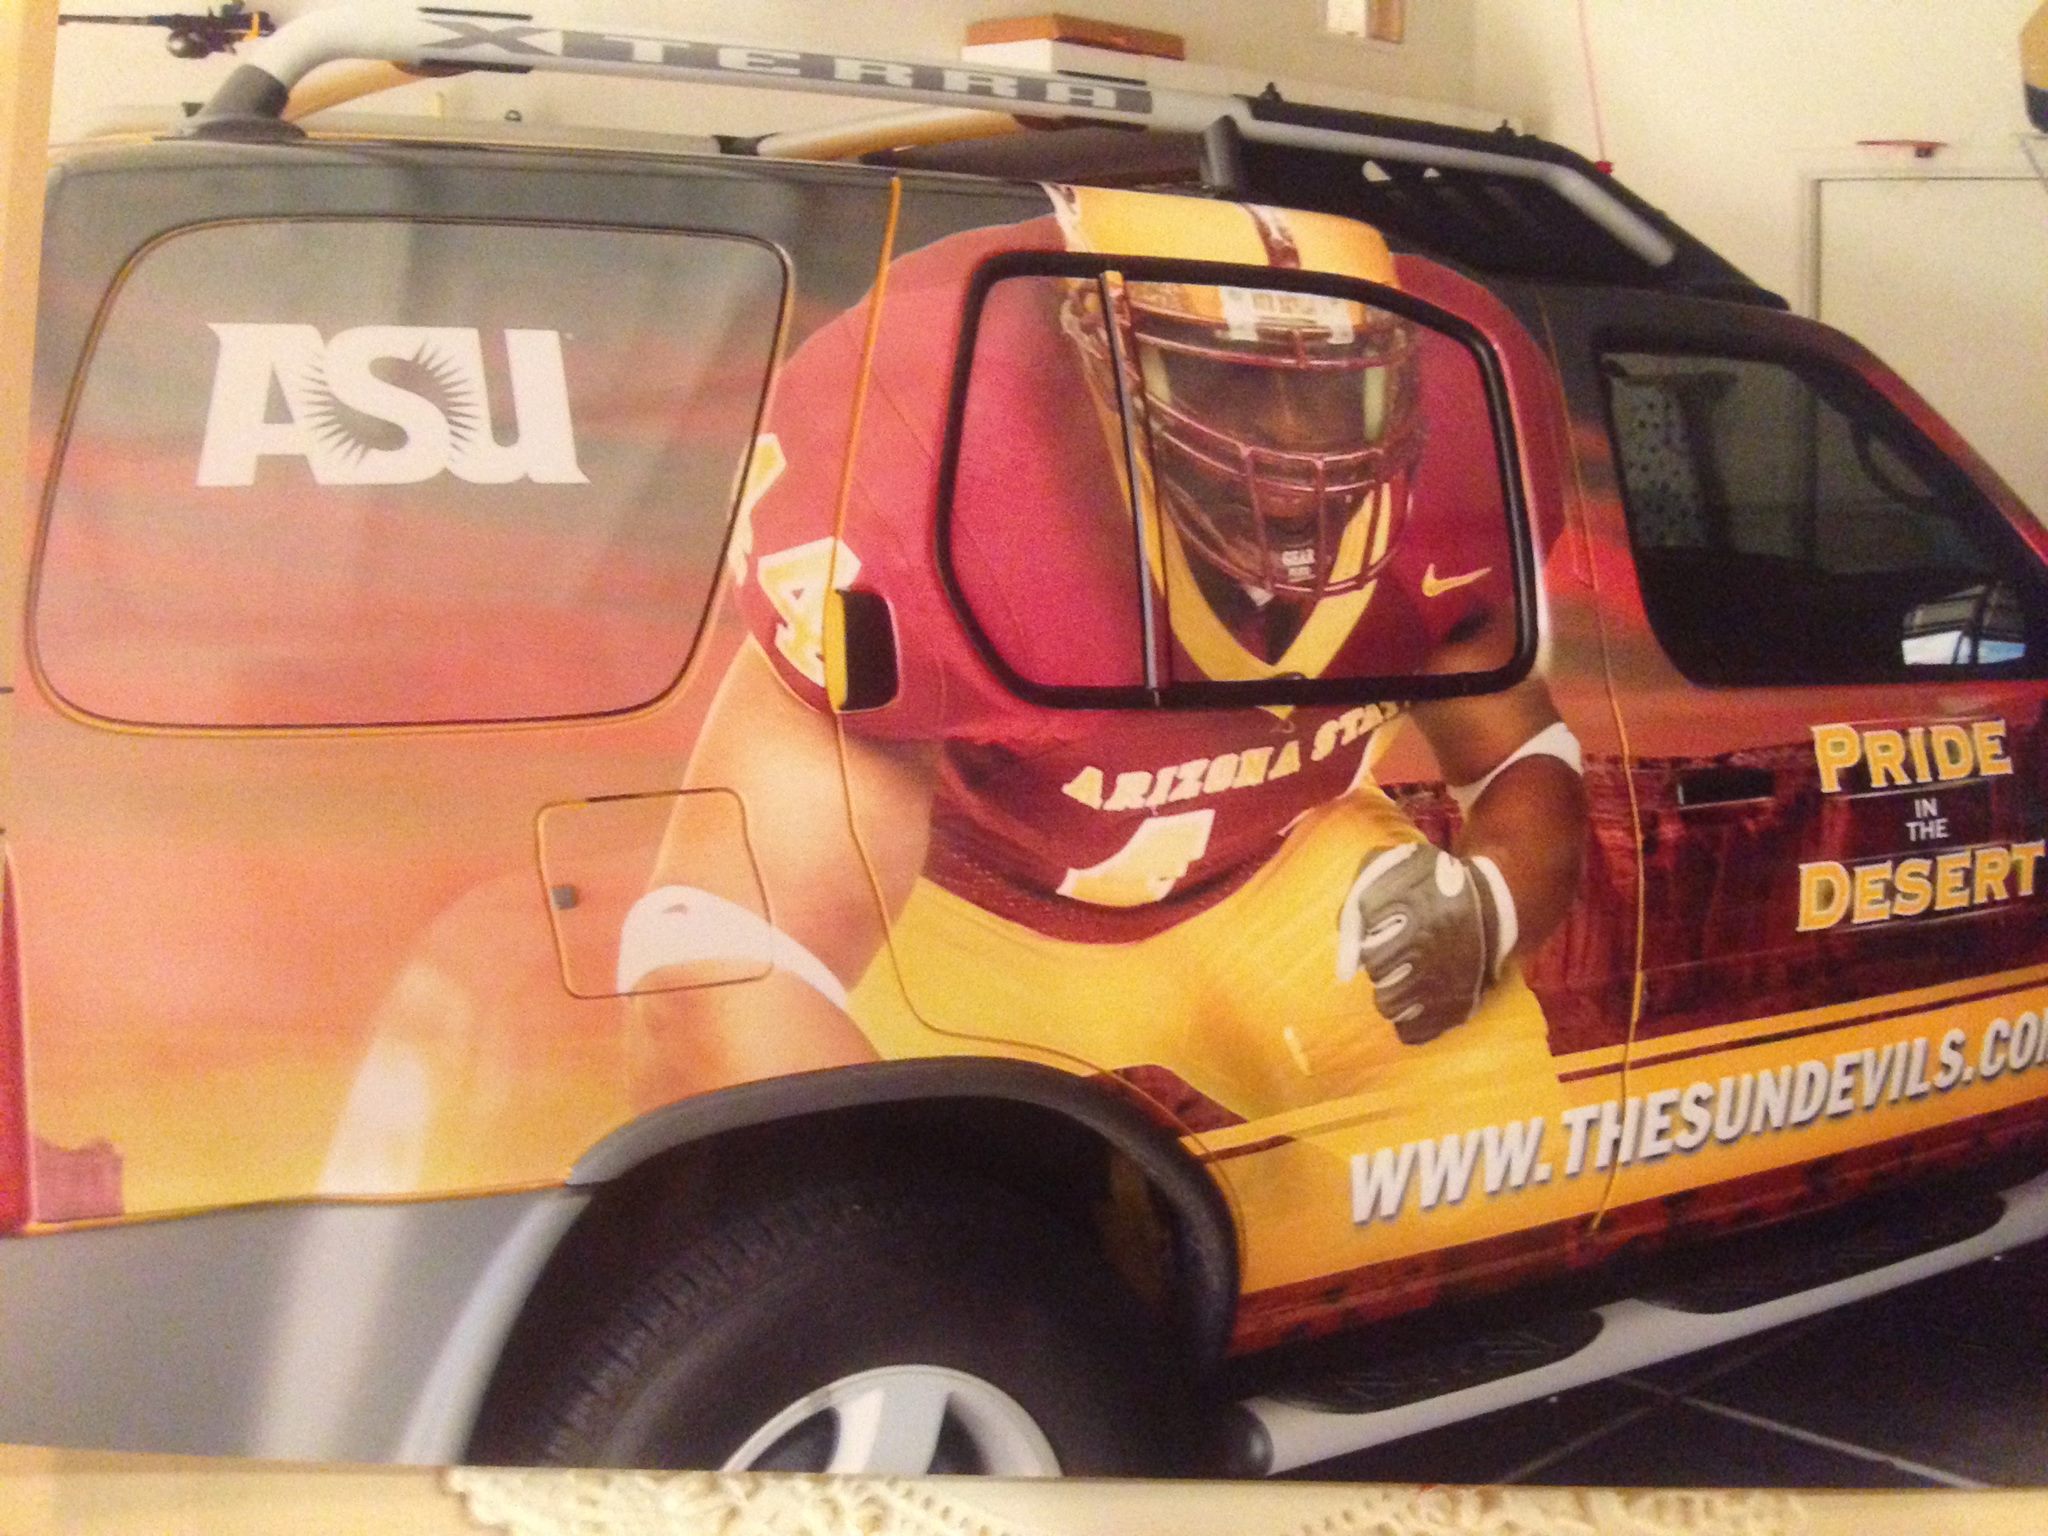 A Nissa X-Terra vehicle covered in a wrap featuring an ASU football player